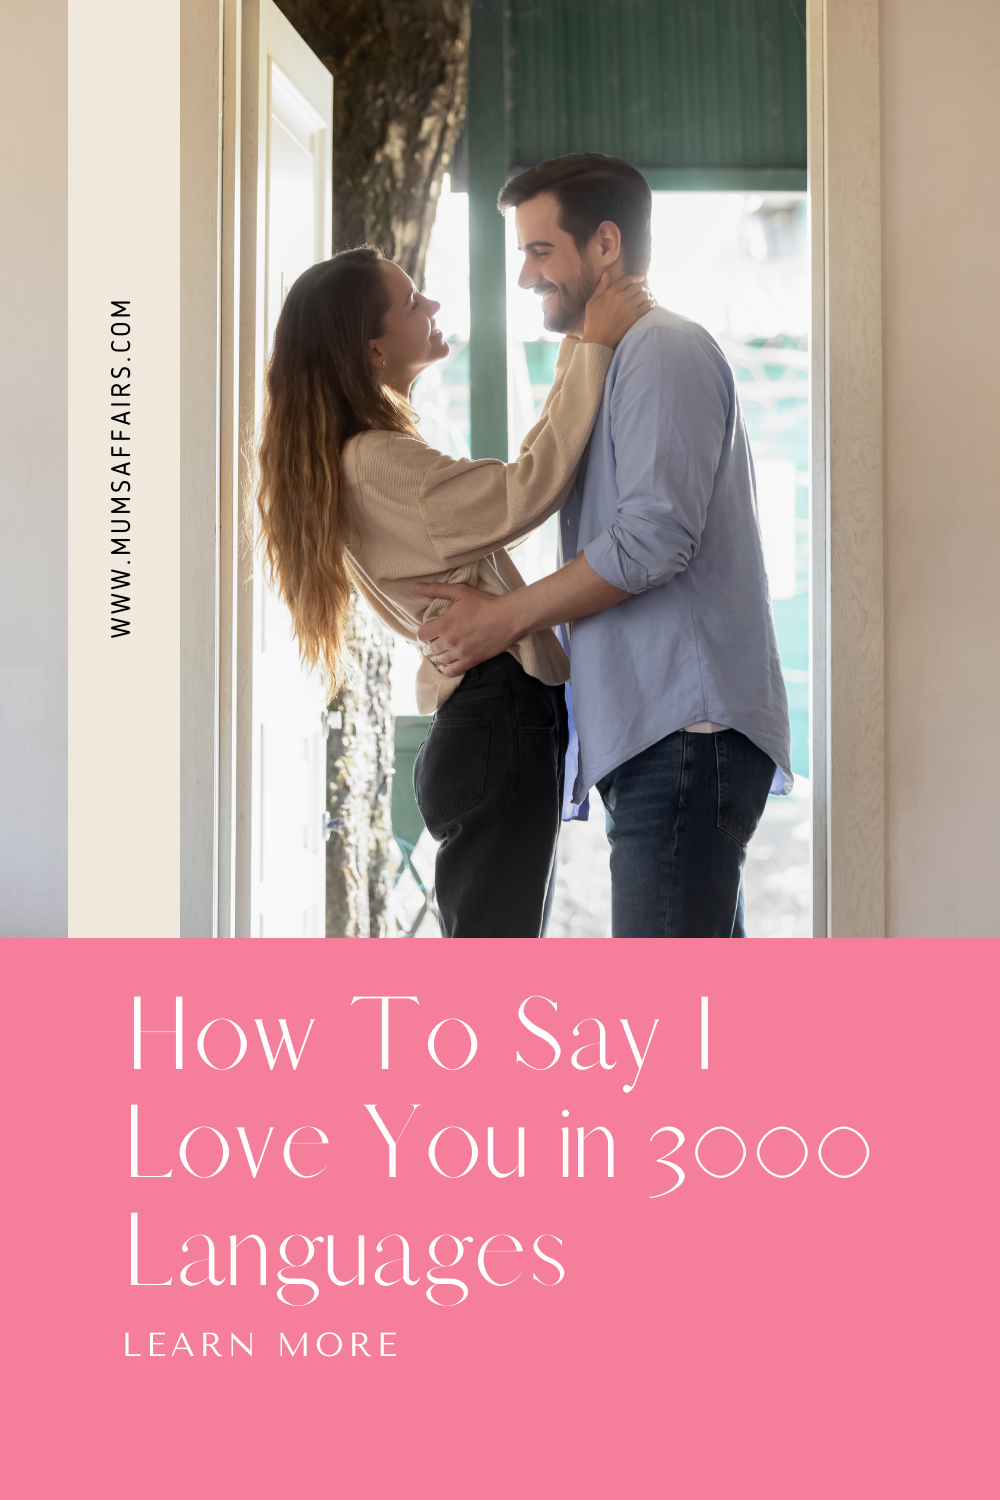 Ways to say I love you in many languages